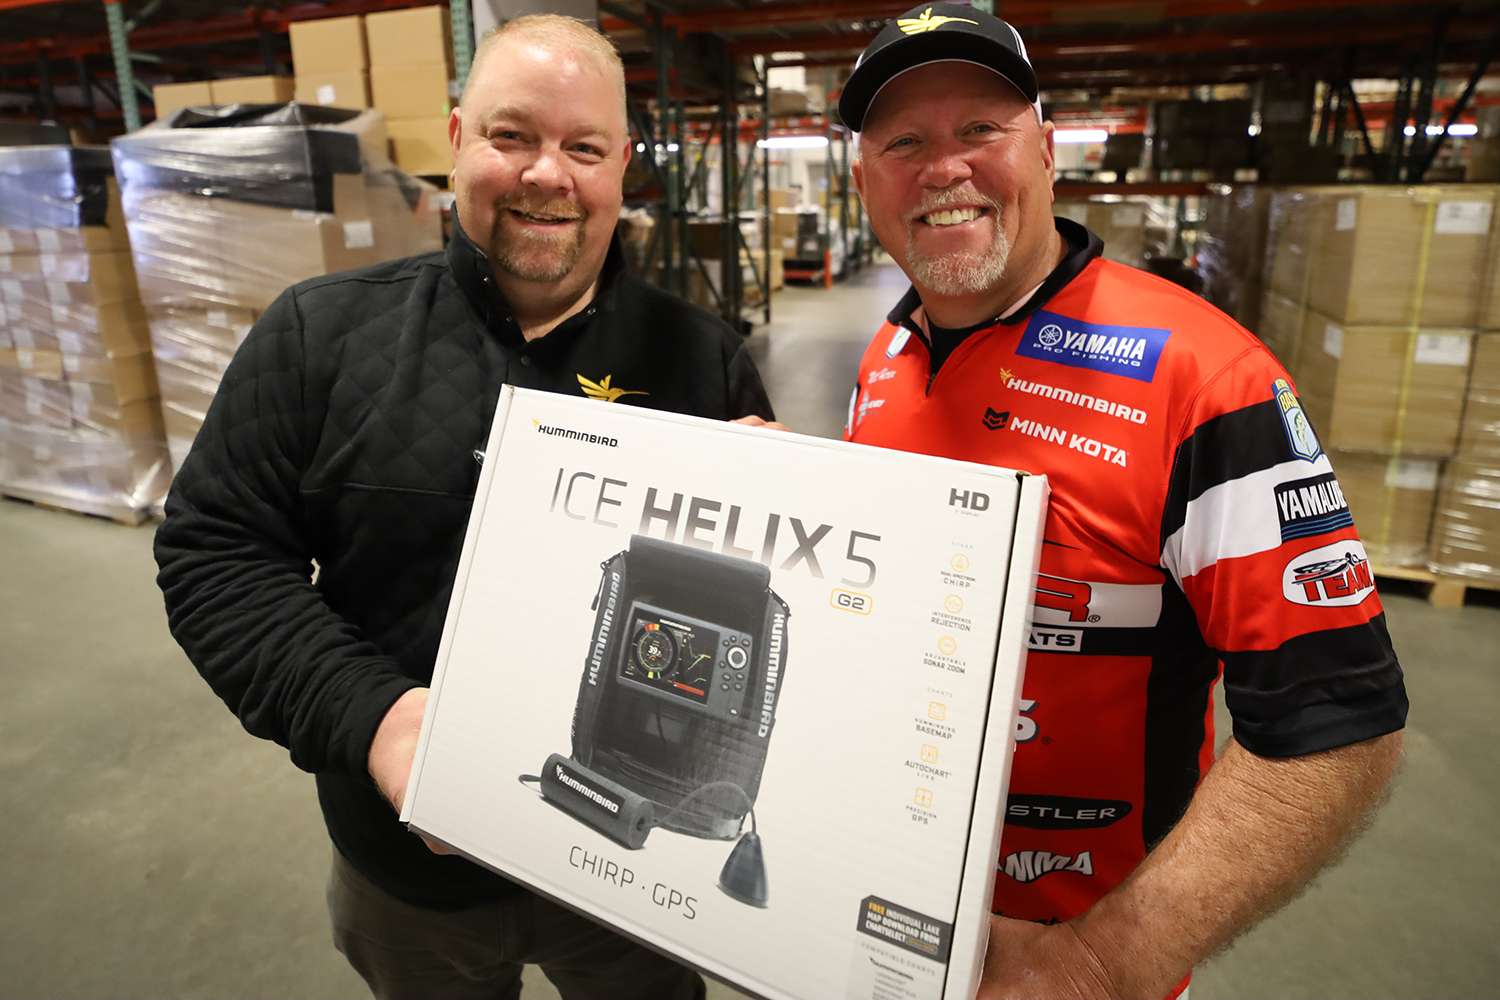 Price knows this unit very well while Herren is still unsure if ice fishing is actually a thing. Price is a Minnesota native, so he has plenty of experience with this thing. Herren is awaiting an official invite to give it a try. Perhaps a future Bassmaster story?